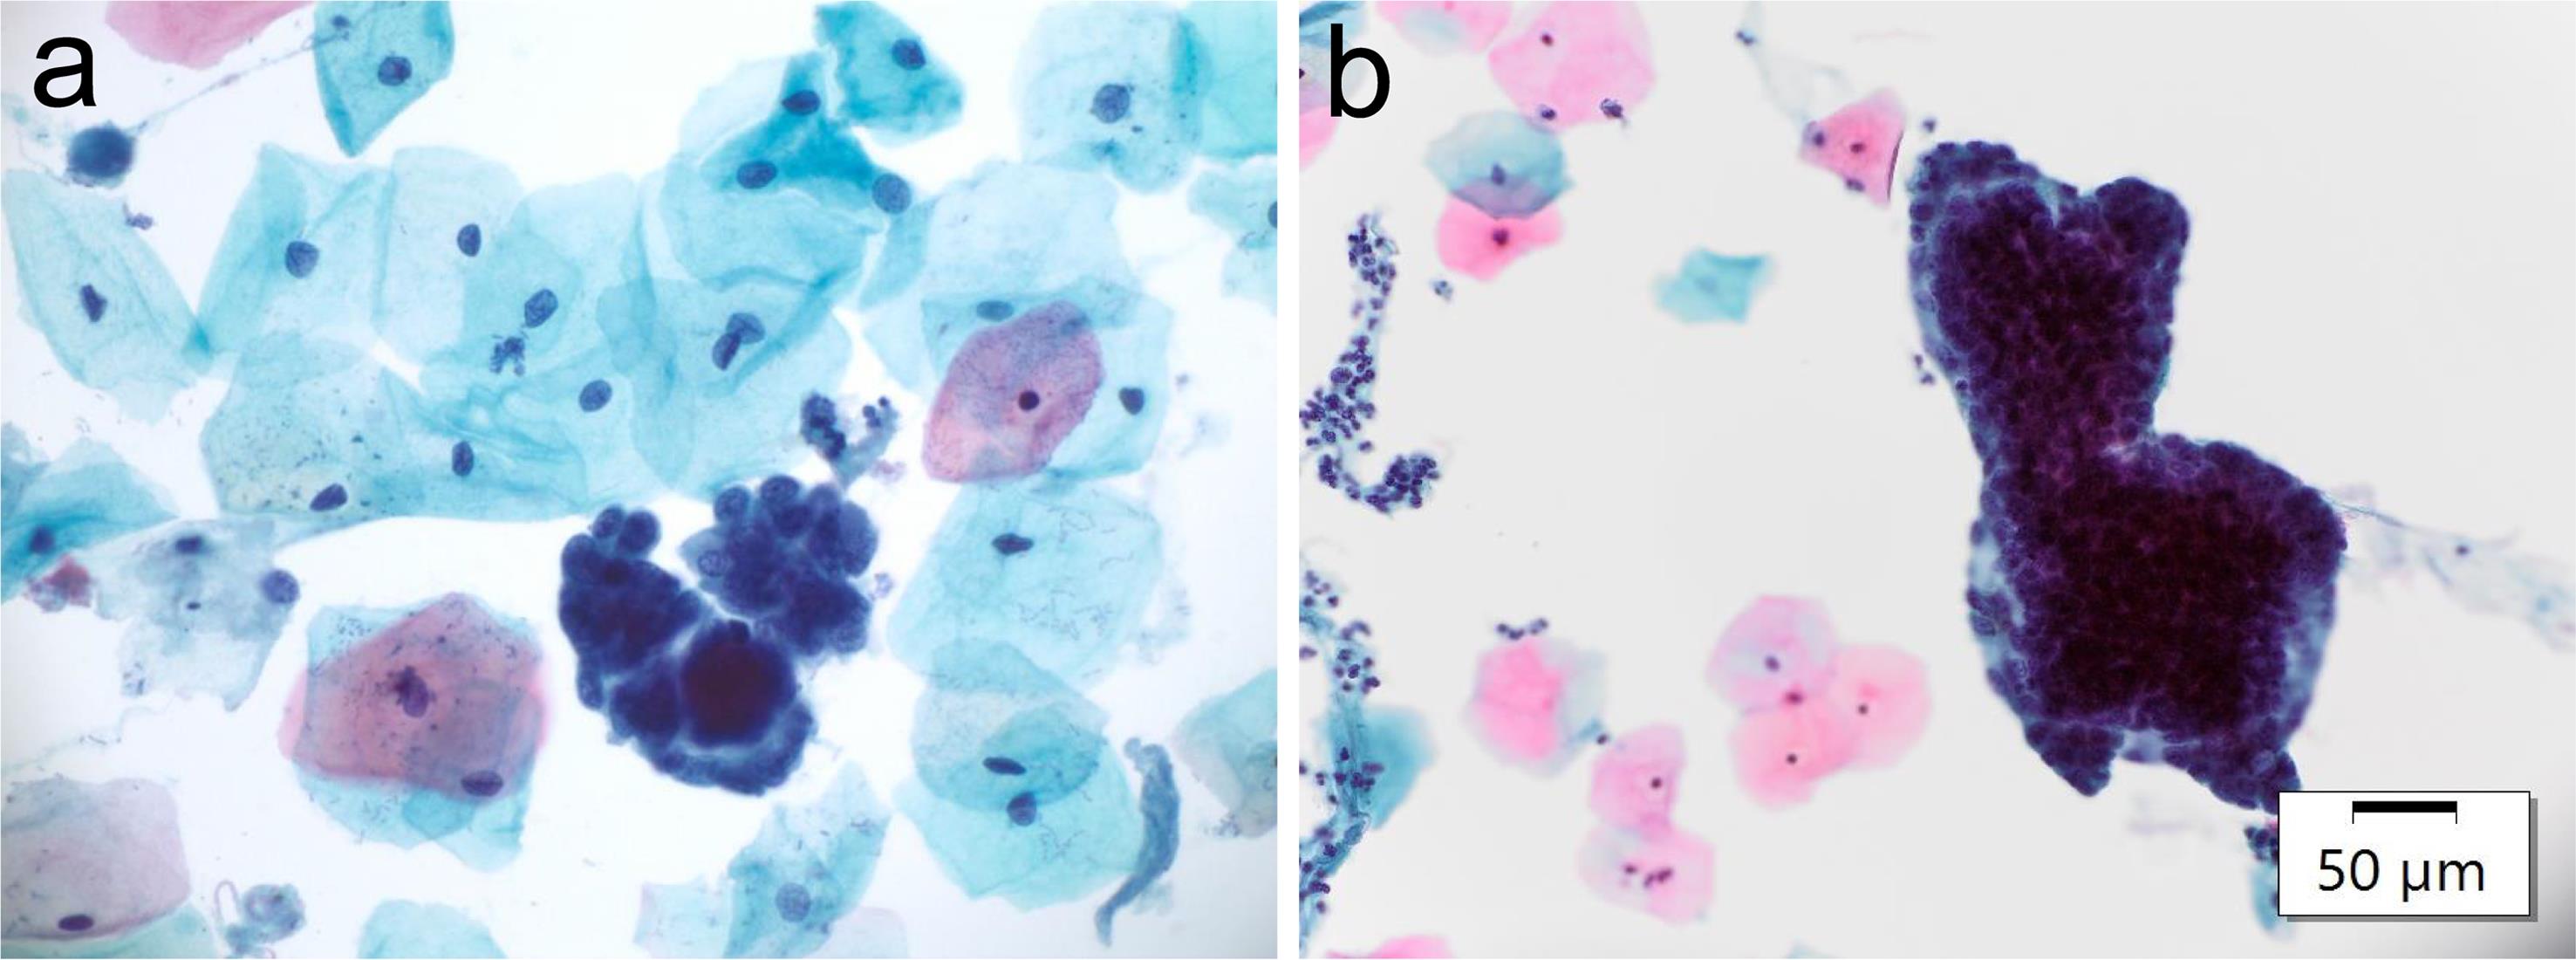 Clusters of benign endometrial cells forming a 3-dimention (3D) glandular configuration (a–b).